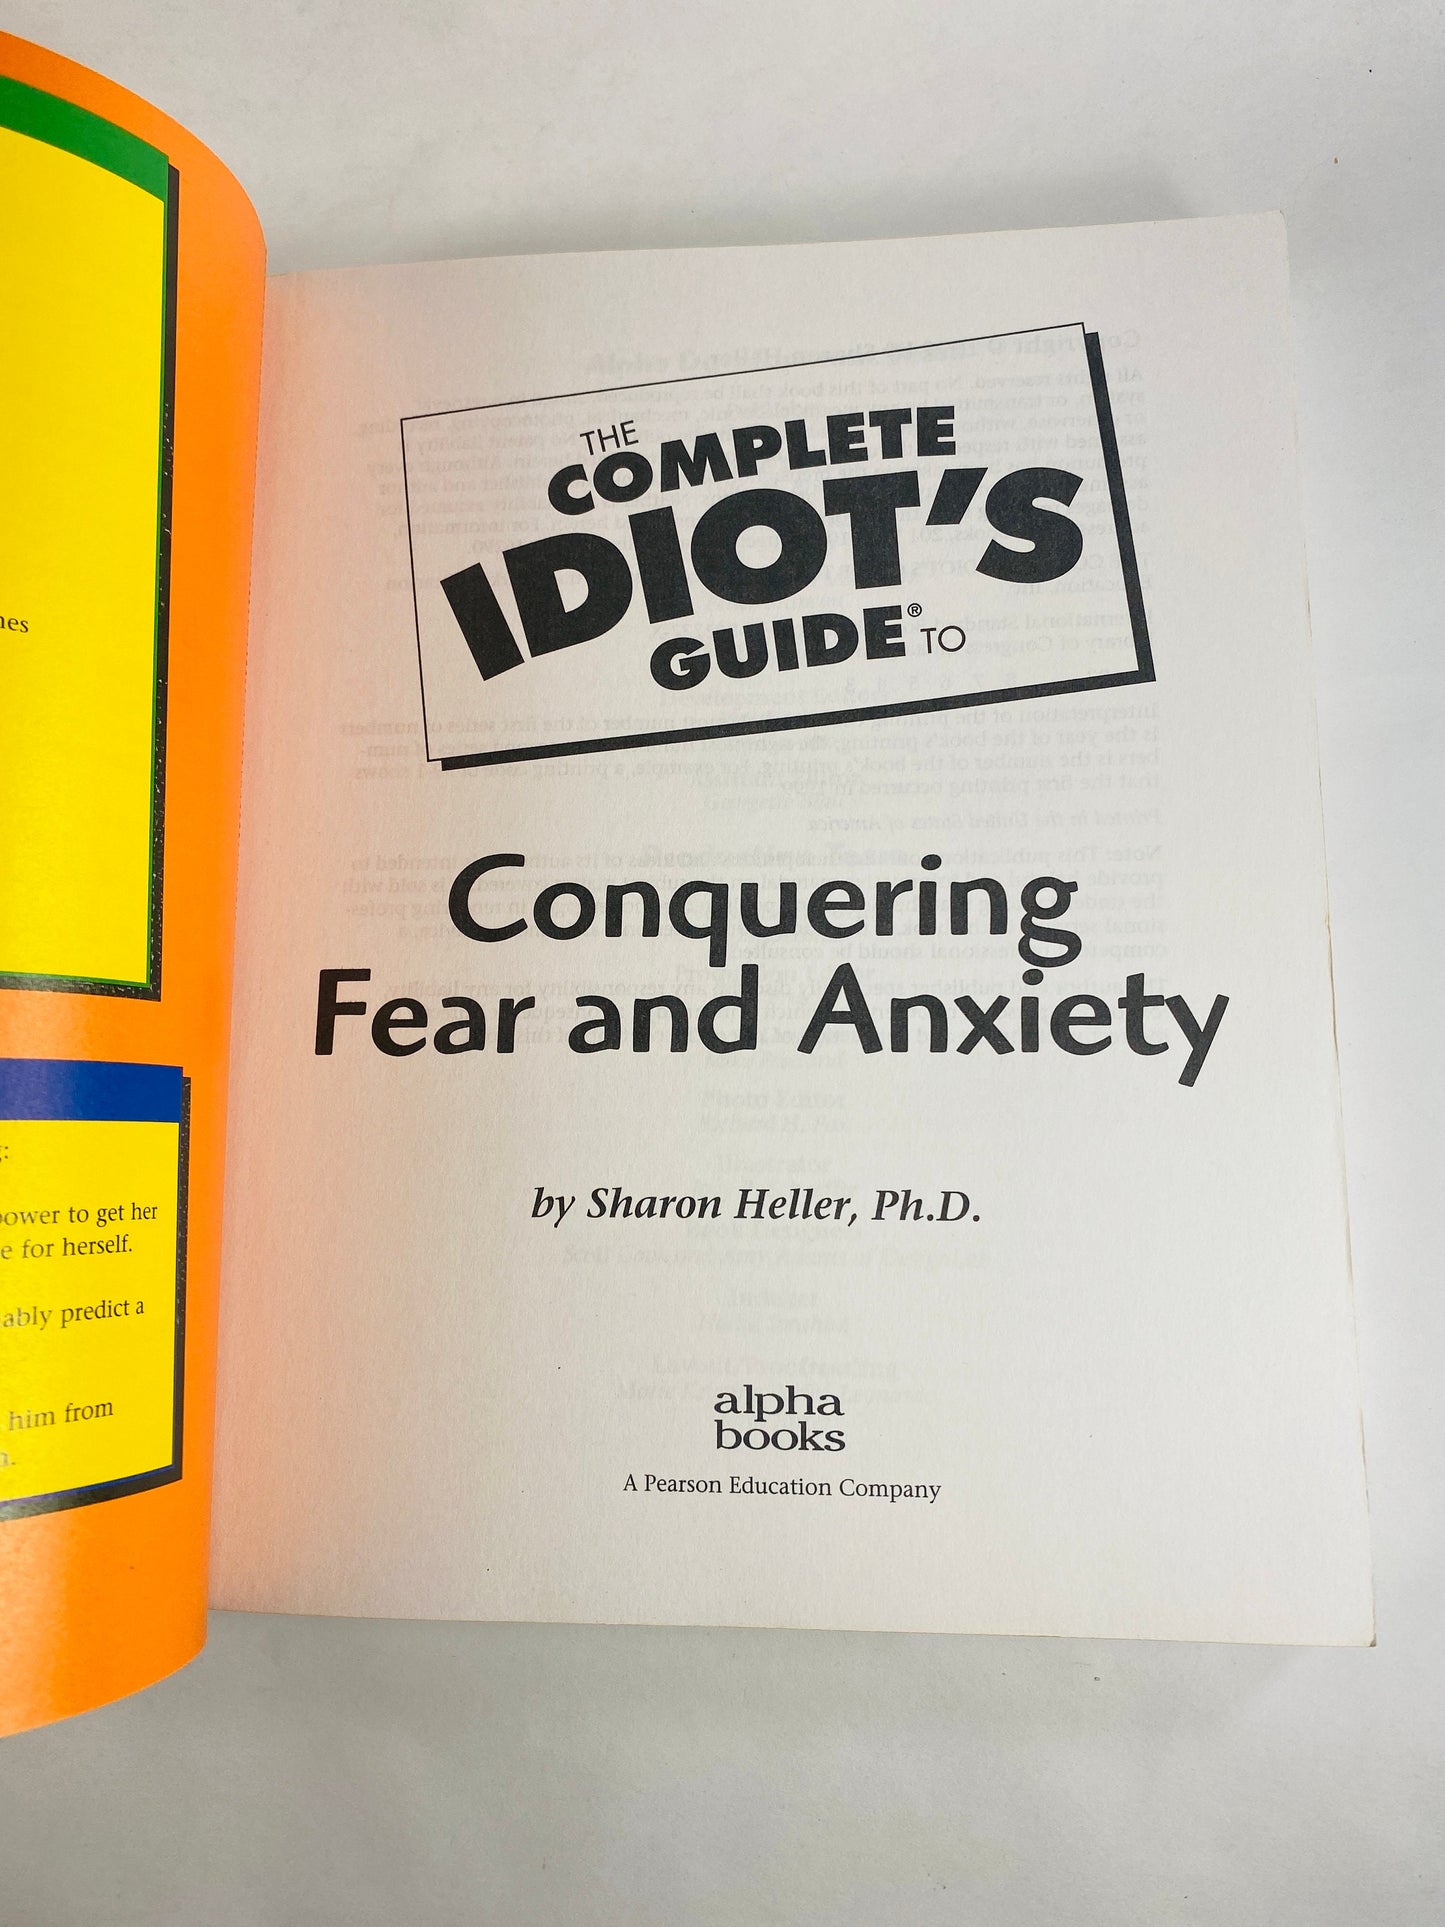 Idiot’s Guide to Conquering Fear and Anxiety vintage paperback book by Sharon Heller reference guide nervous terror and management